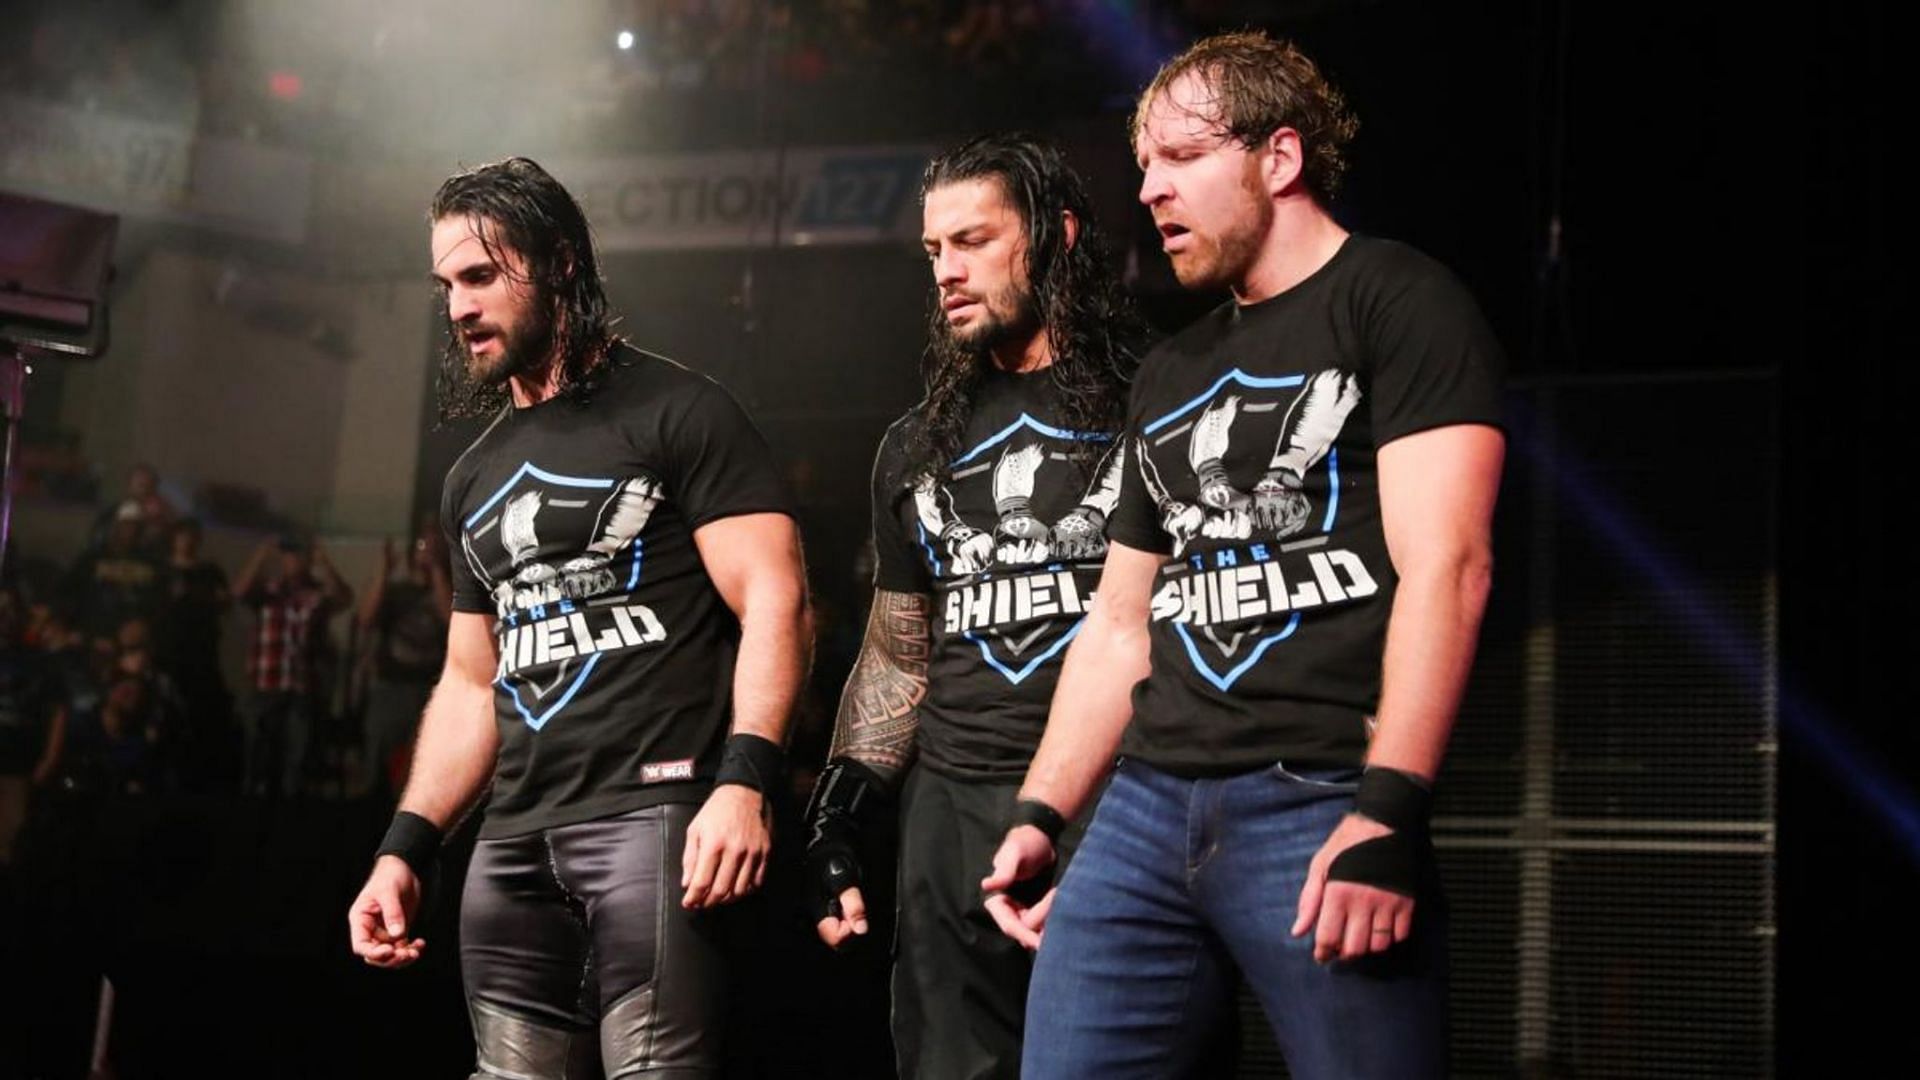 The Shield was one of the most dominant factions in WWE history